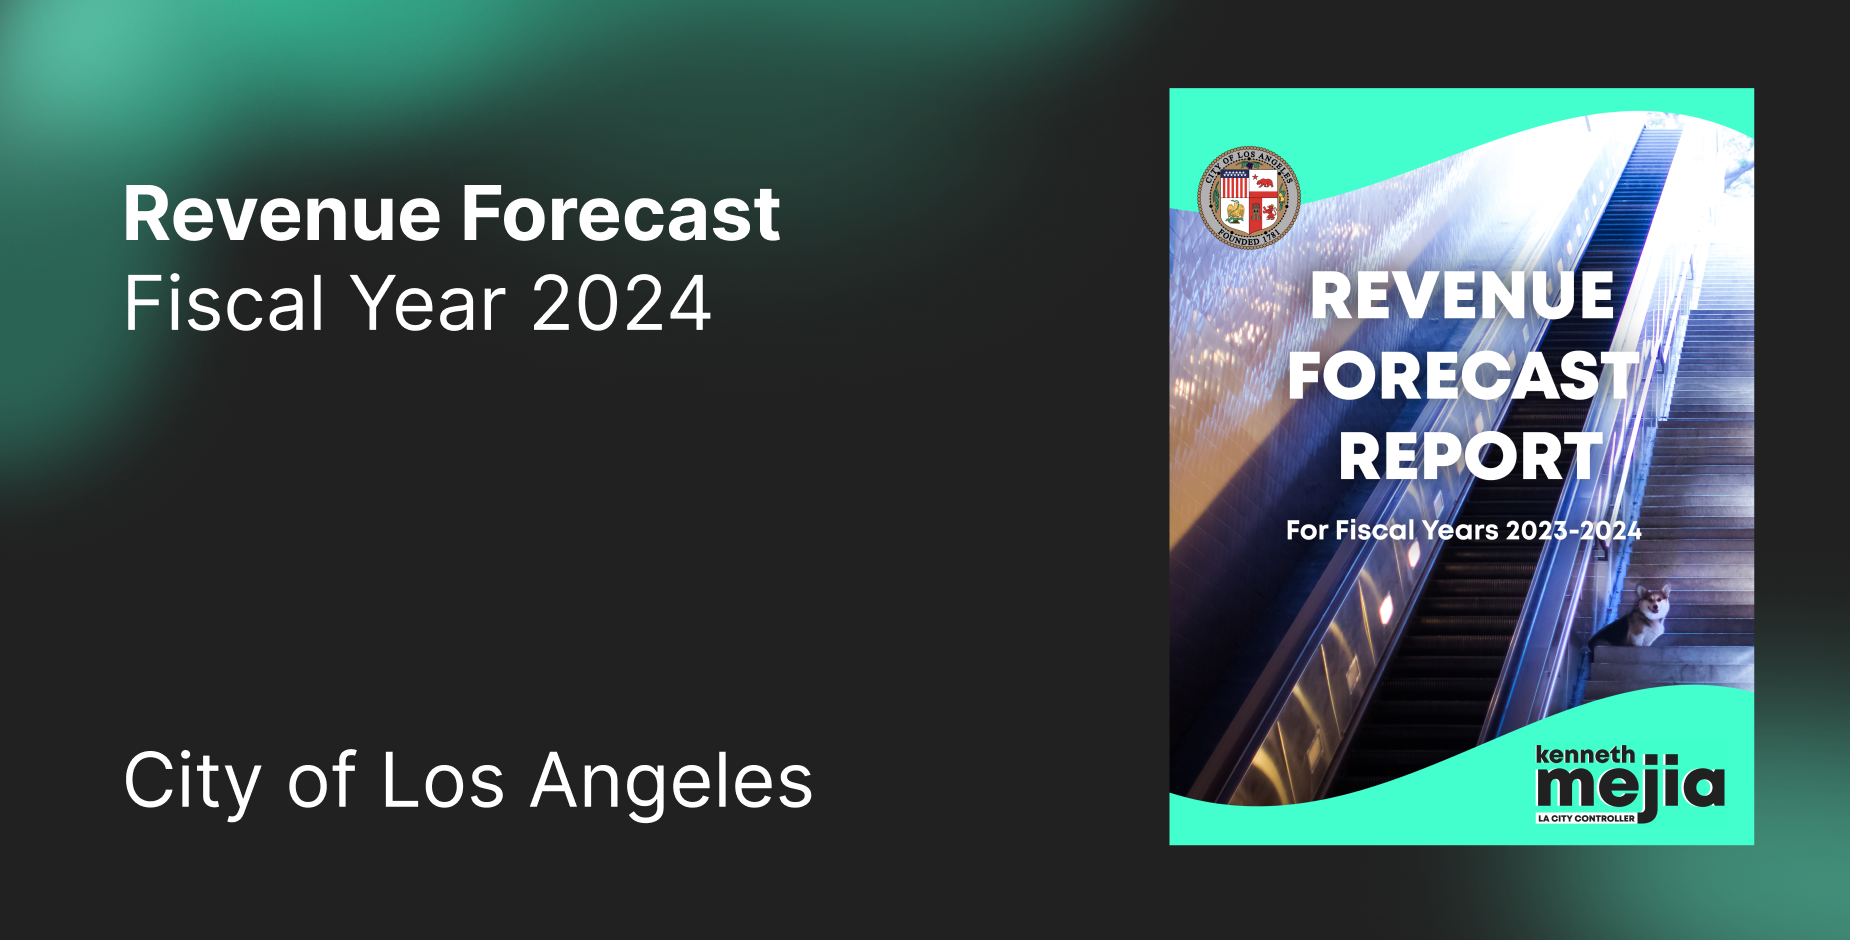 Revenue Forecast for Fiscal Year 2024